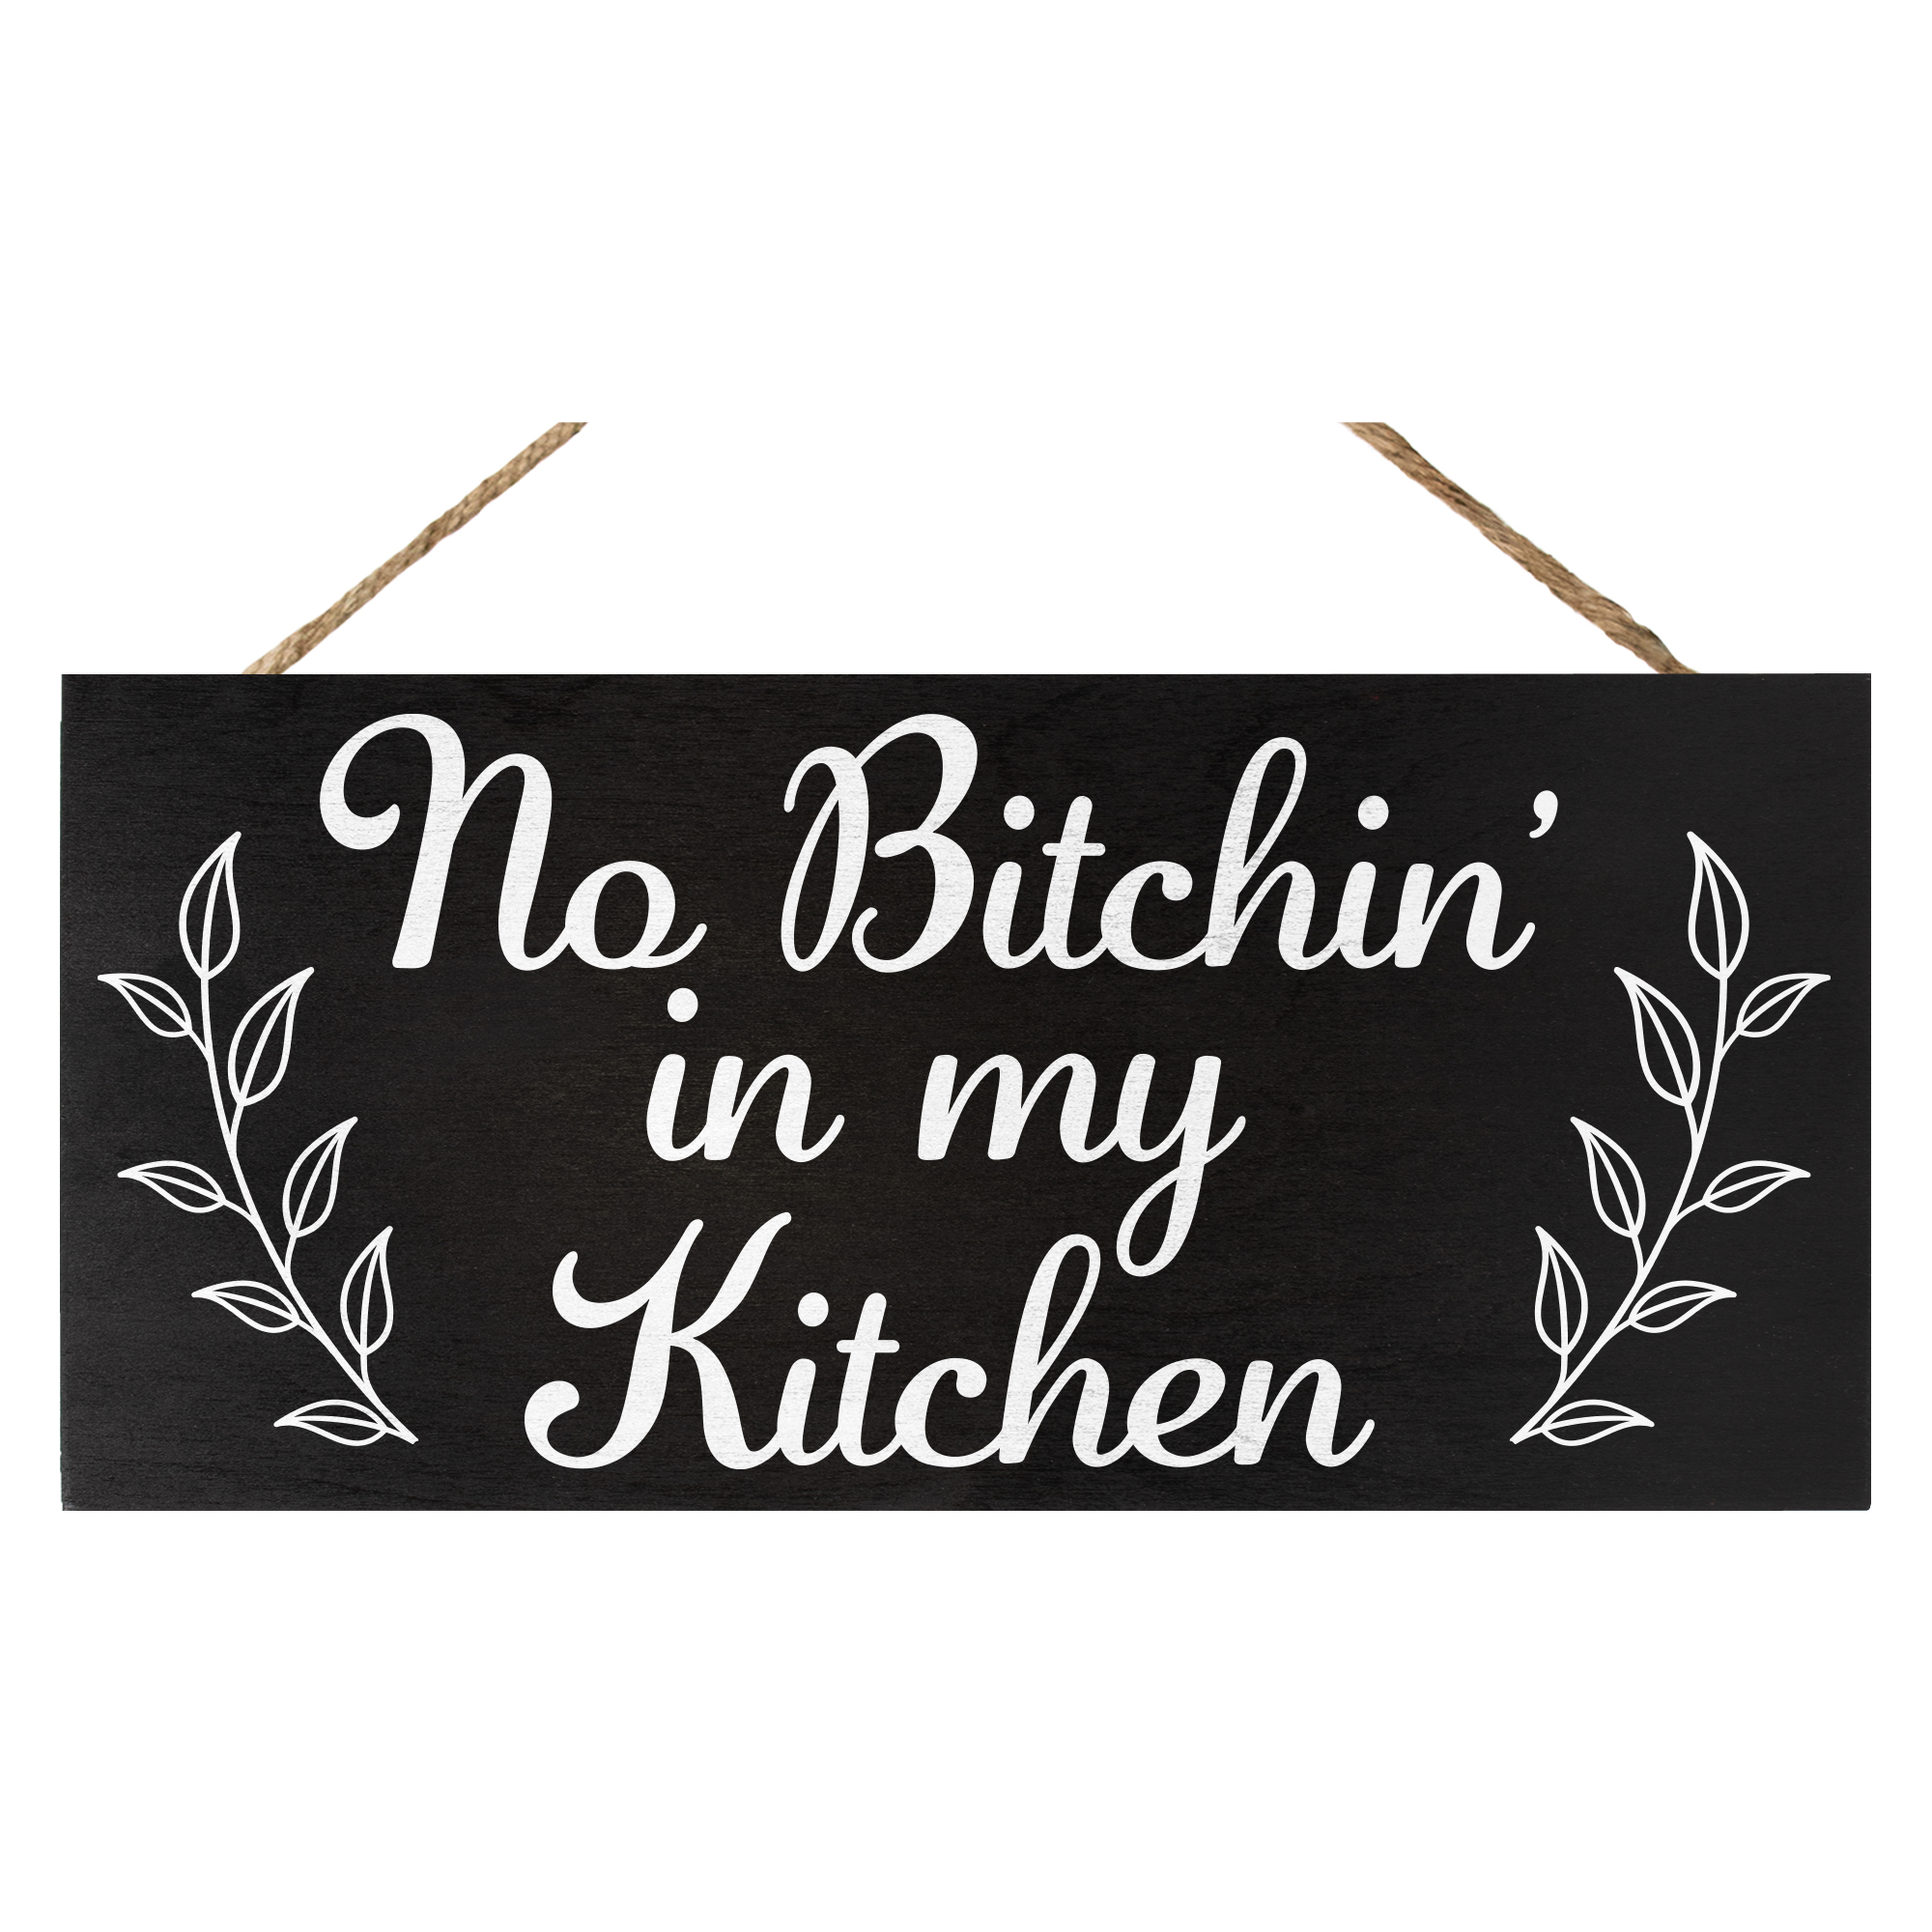 No Bitchin In My Kitchen, Funny kitchen decor – Woodticks Wood'n Signs